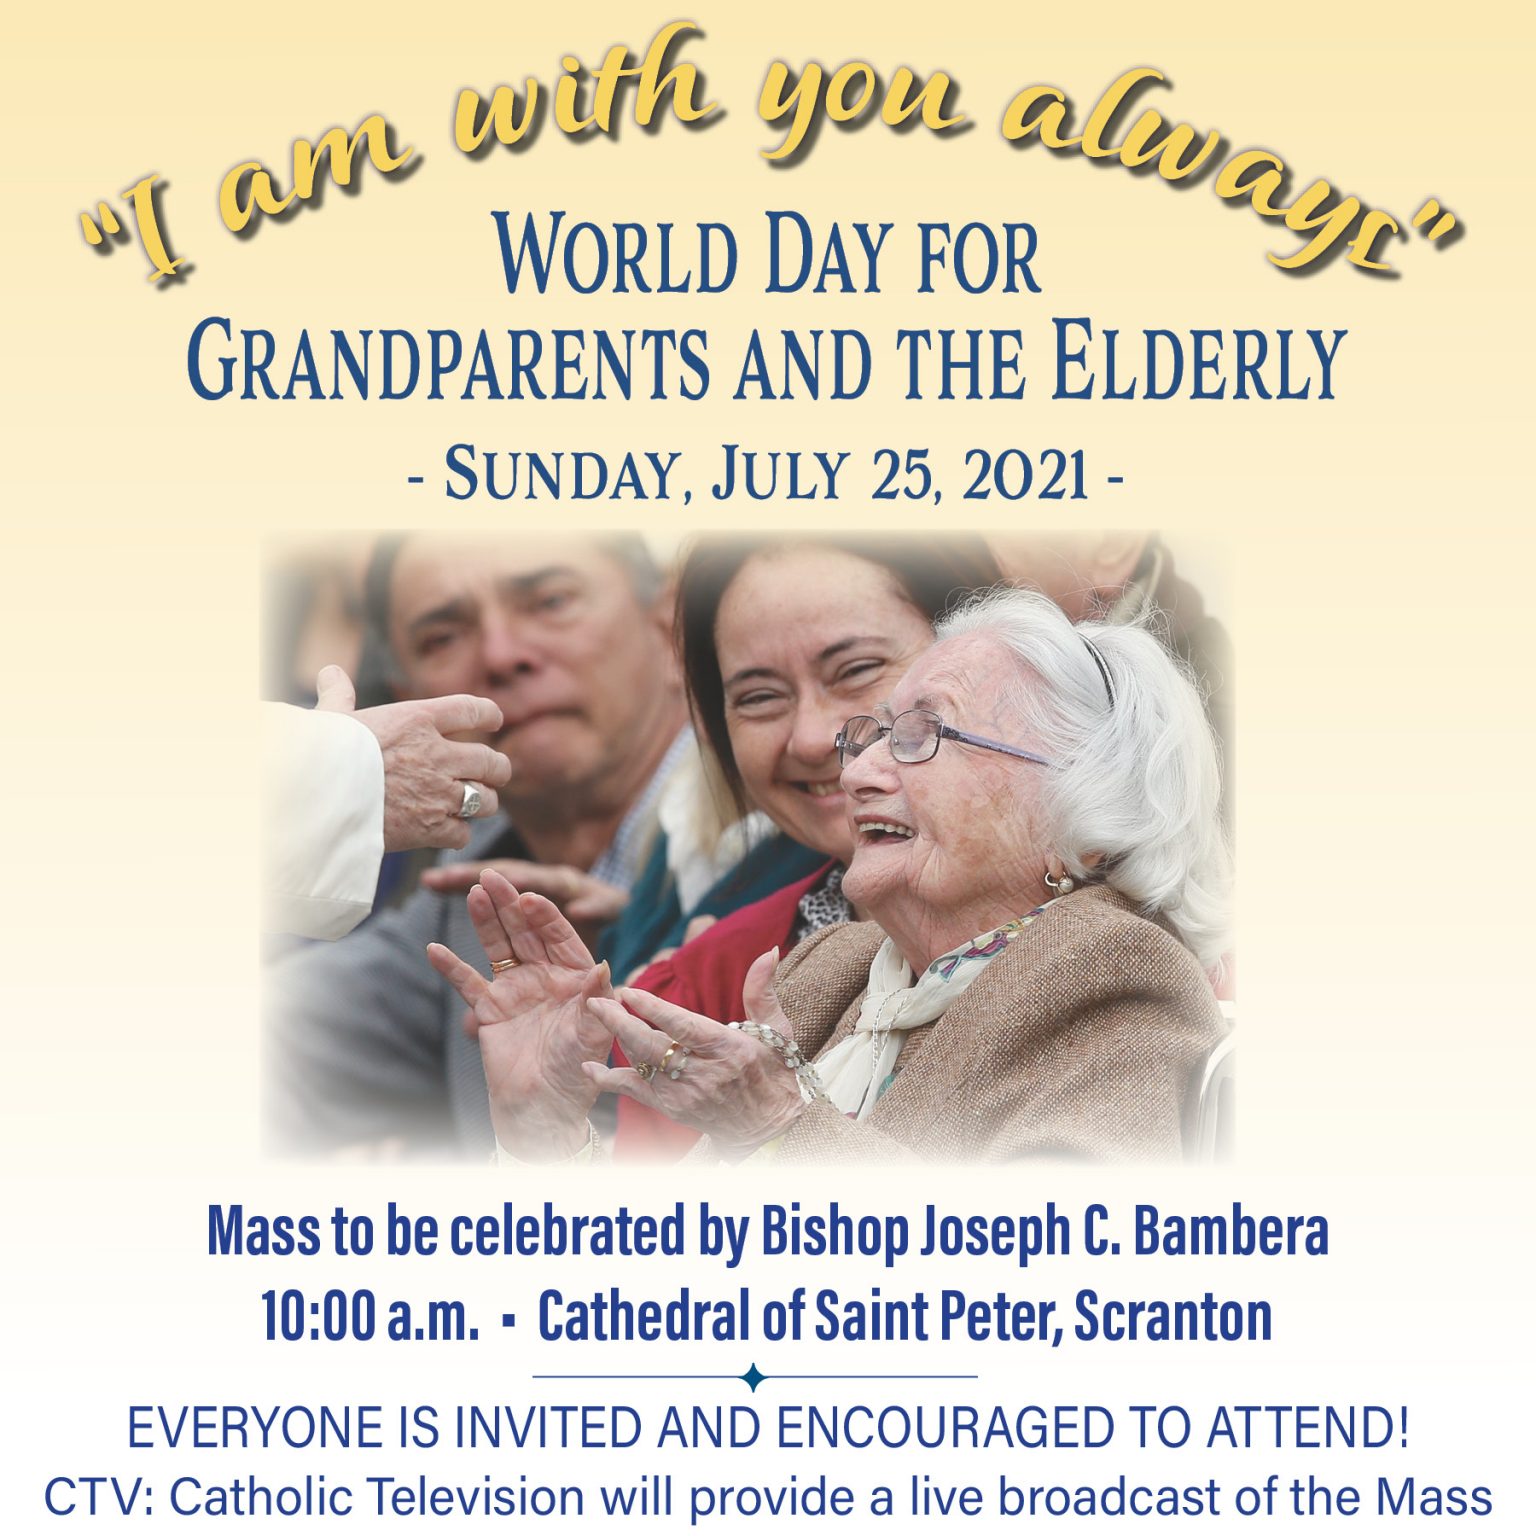 Sunday is World Day for Grandparents and the Elderly Diocese of Scranton